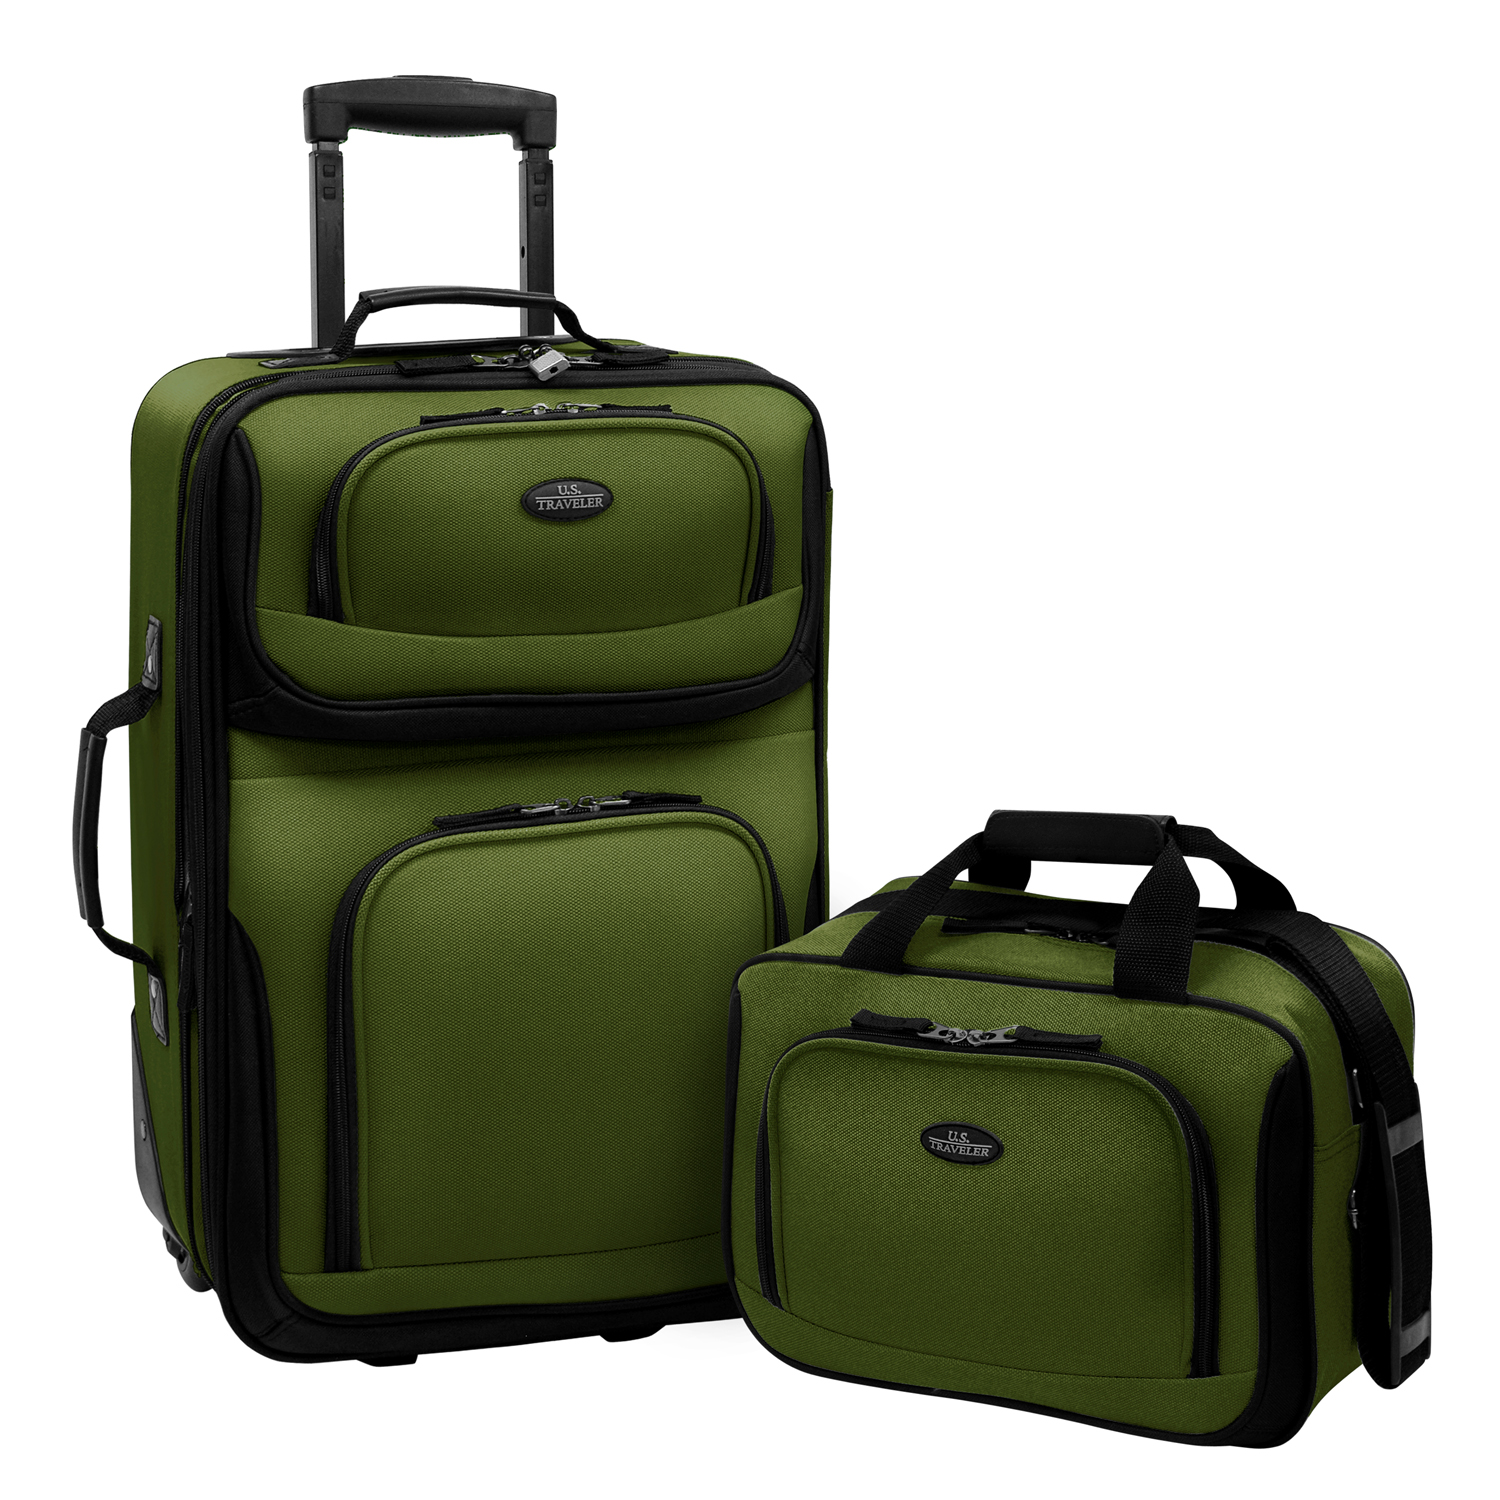 U.S. Traveler Rio Rugged Fabric Expandable Carry-on Luggage, 2 Wheel Rolling Suitcase, Green, 2-Piece - image 1 of 7